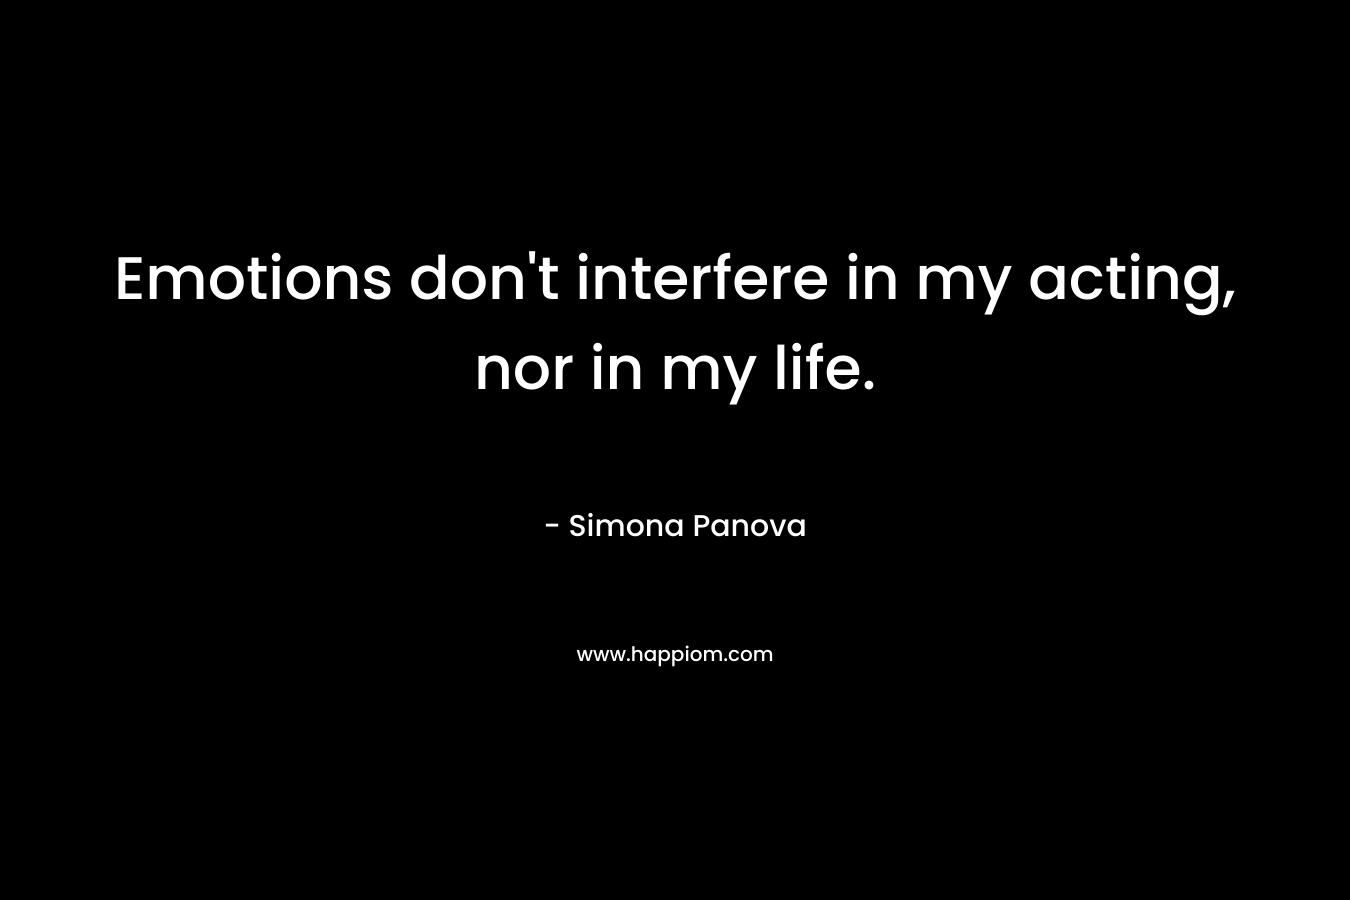 Emotions don't interfere in my acting, nor in my life.